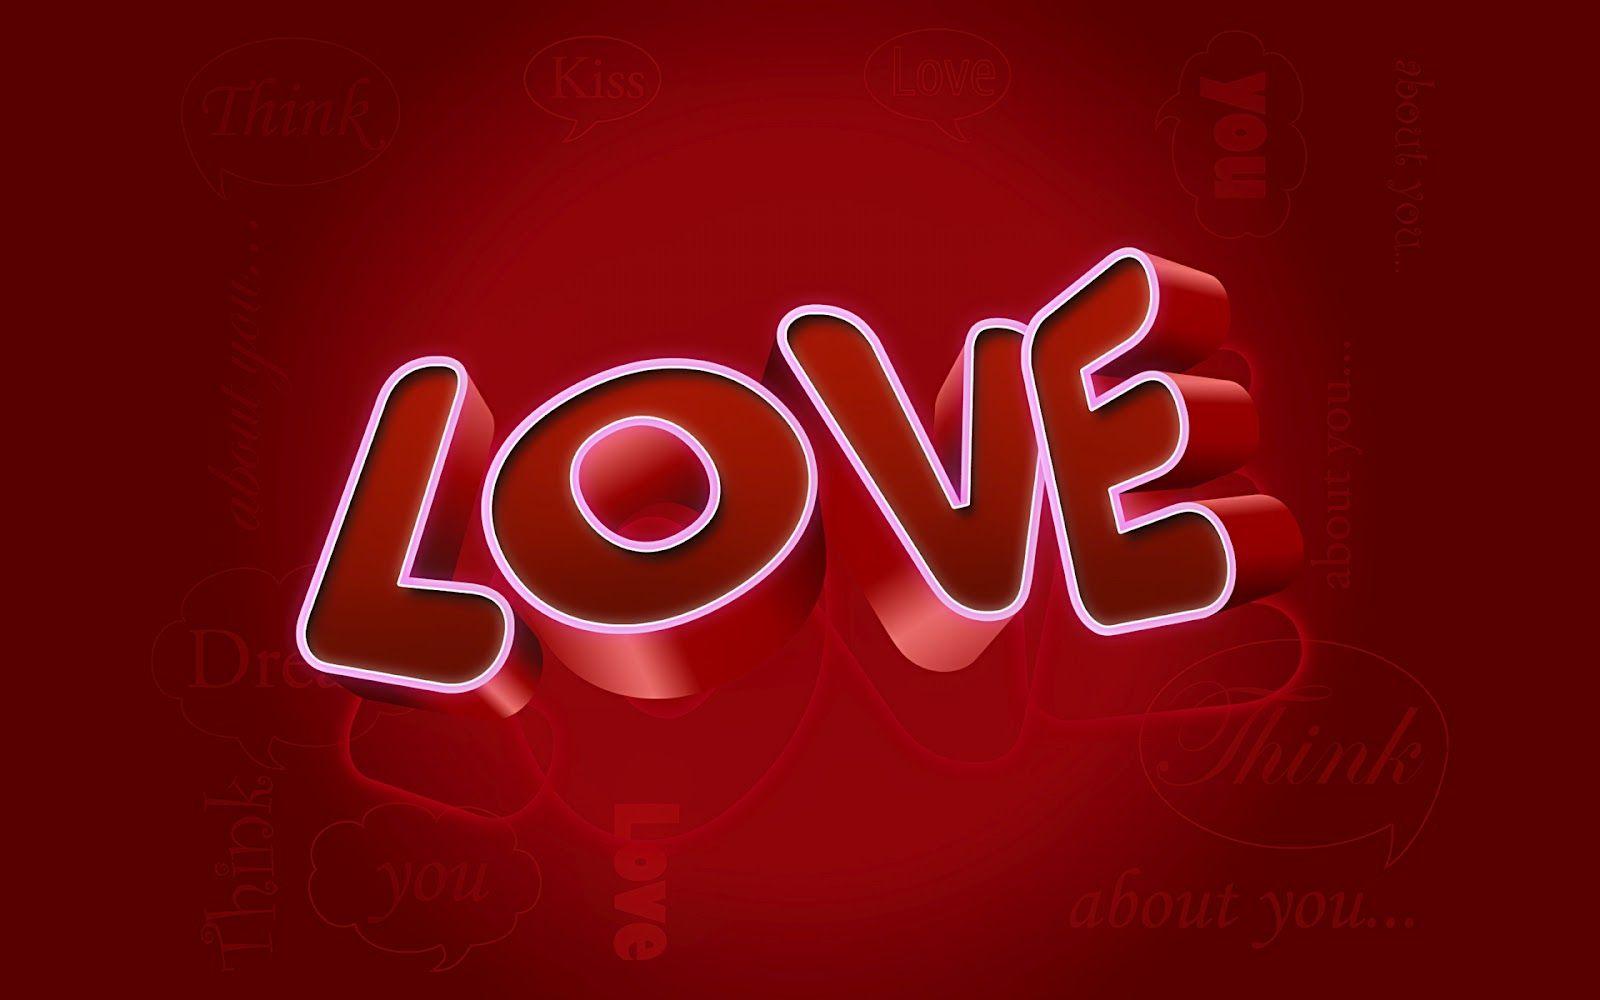 I Love You Wallpapers Image - Wallpaper Cave